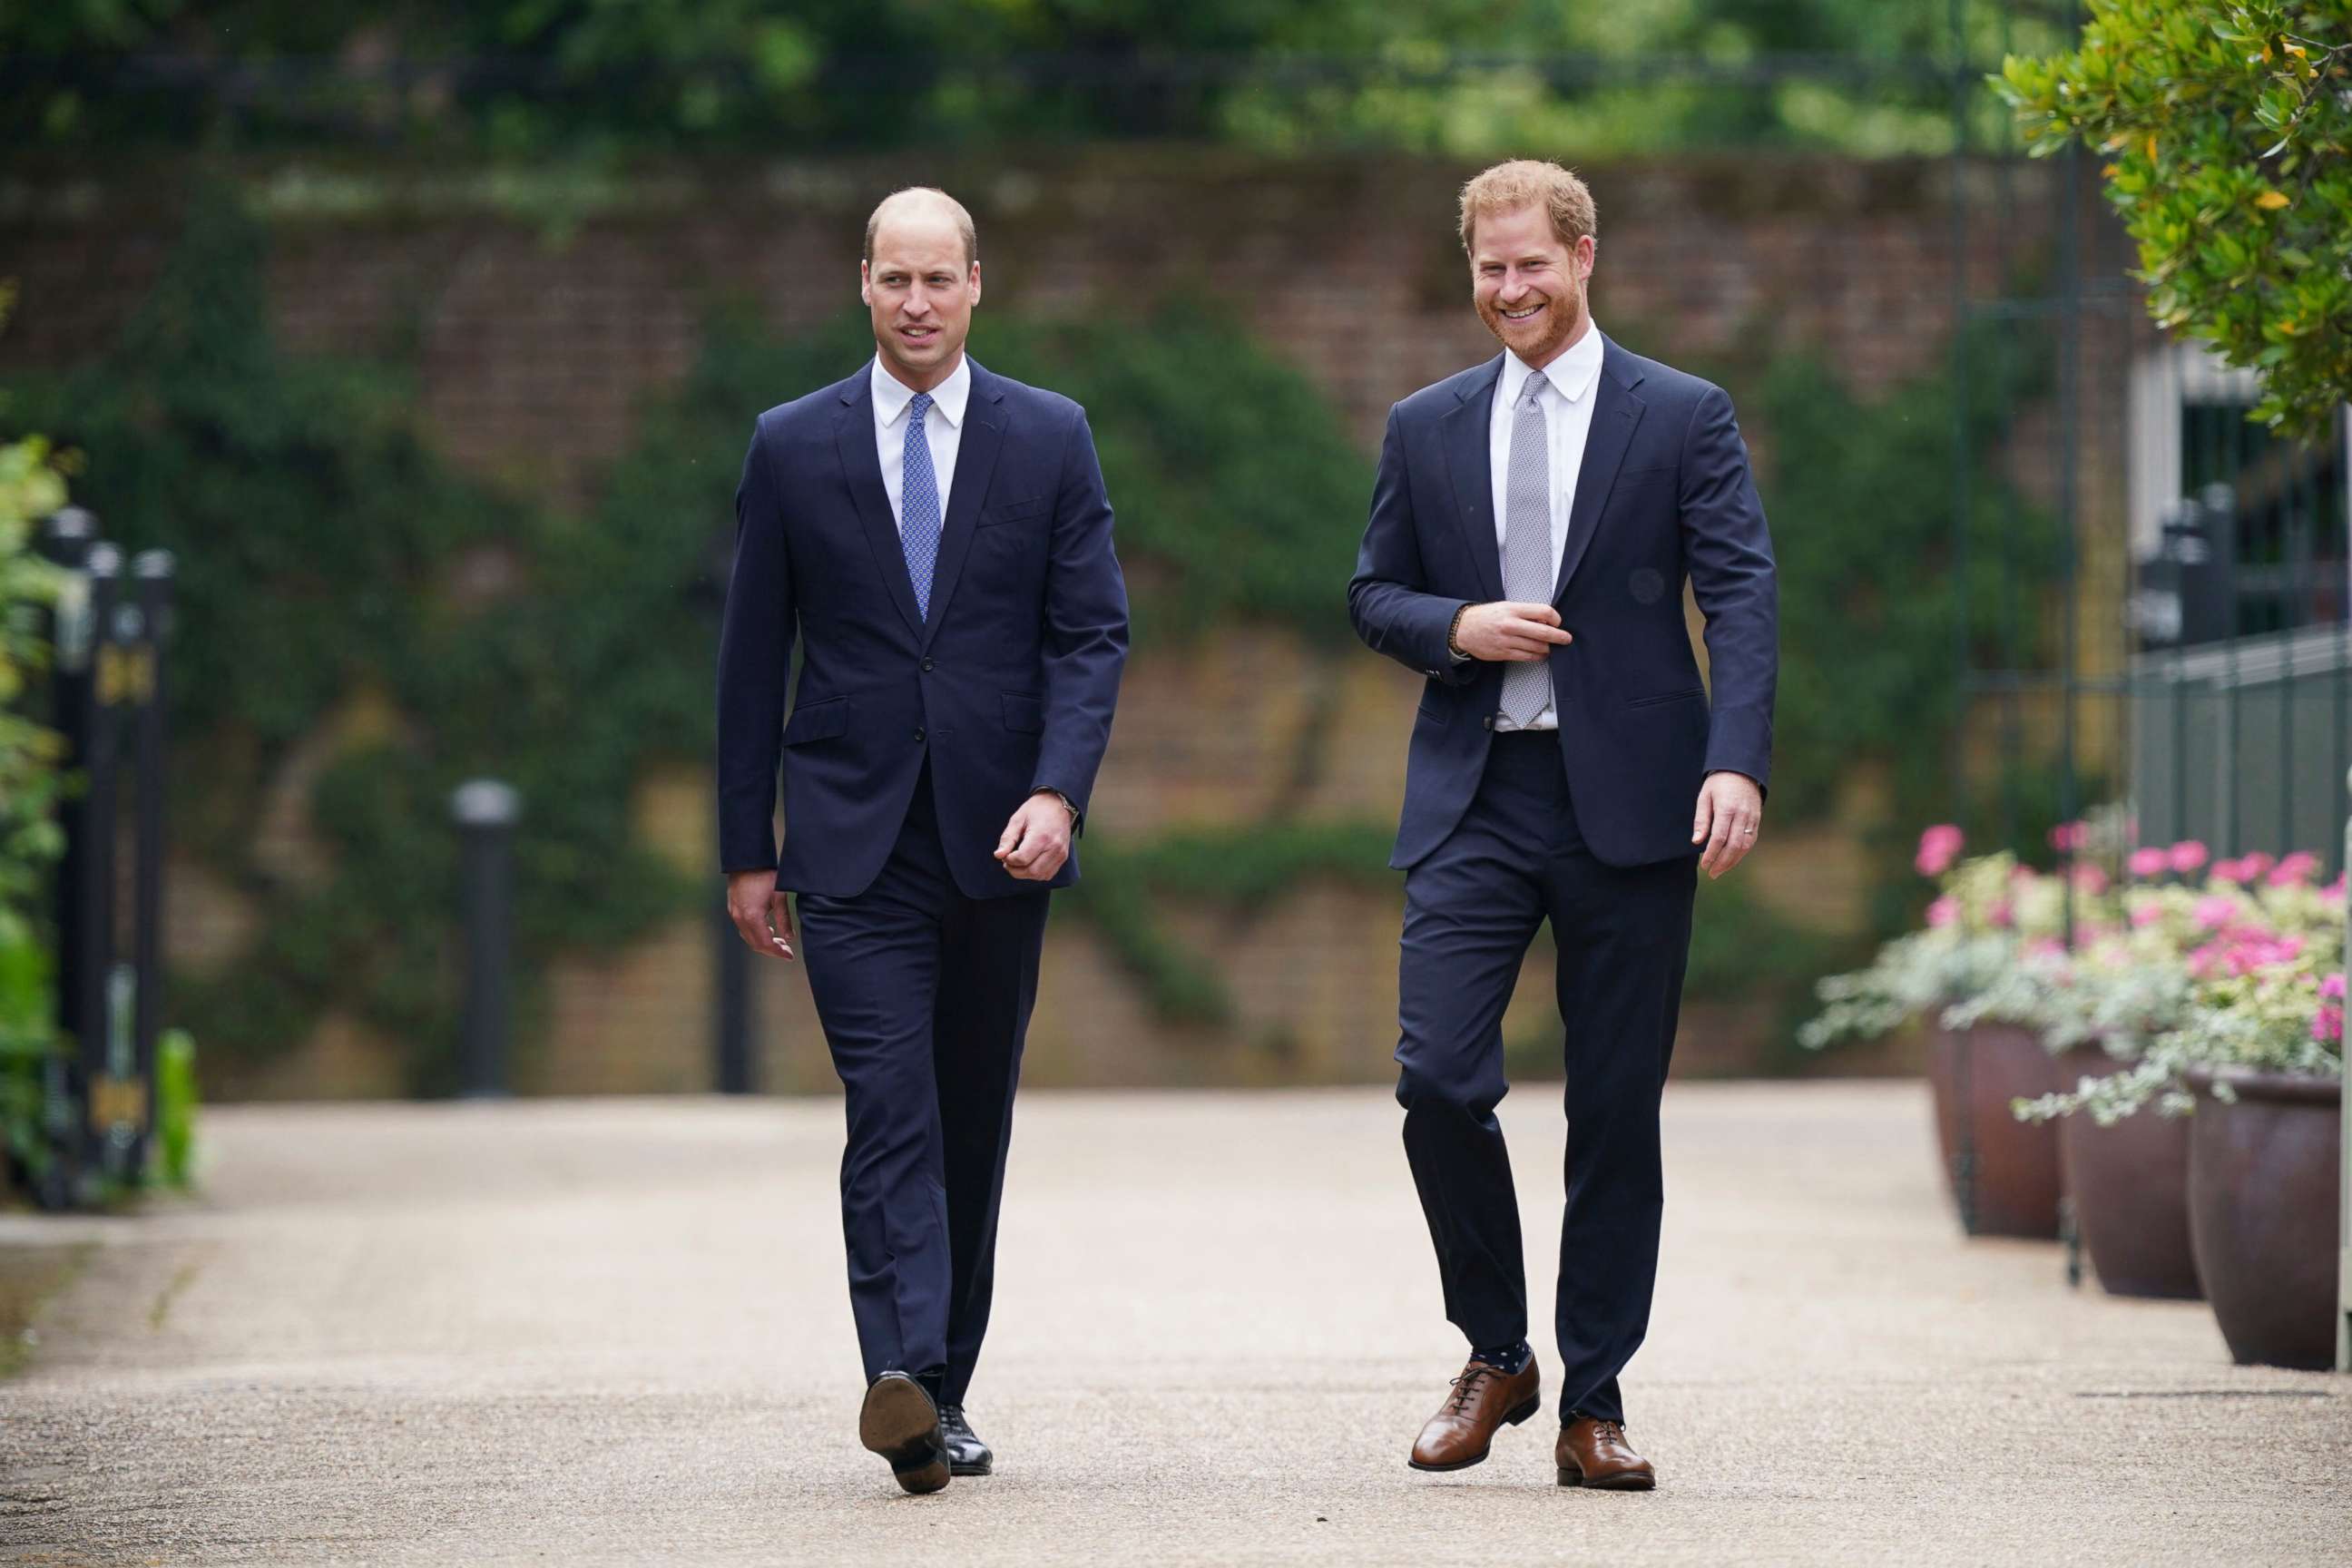 PHOTO: Britain's Prince William and Prince Harry arrive for the statue unveiling on what would have been Princess Diana's 60th birthday, in the Sunken Garden at Kensington Palace, London, July 1, 2021.